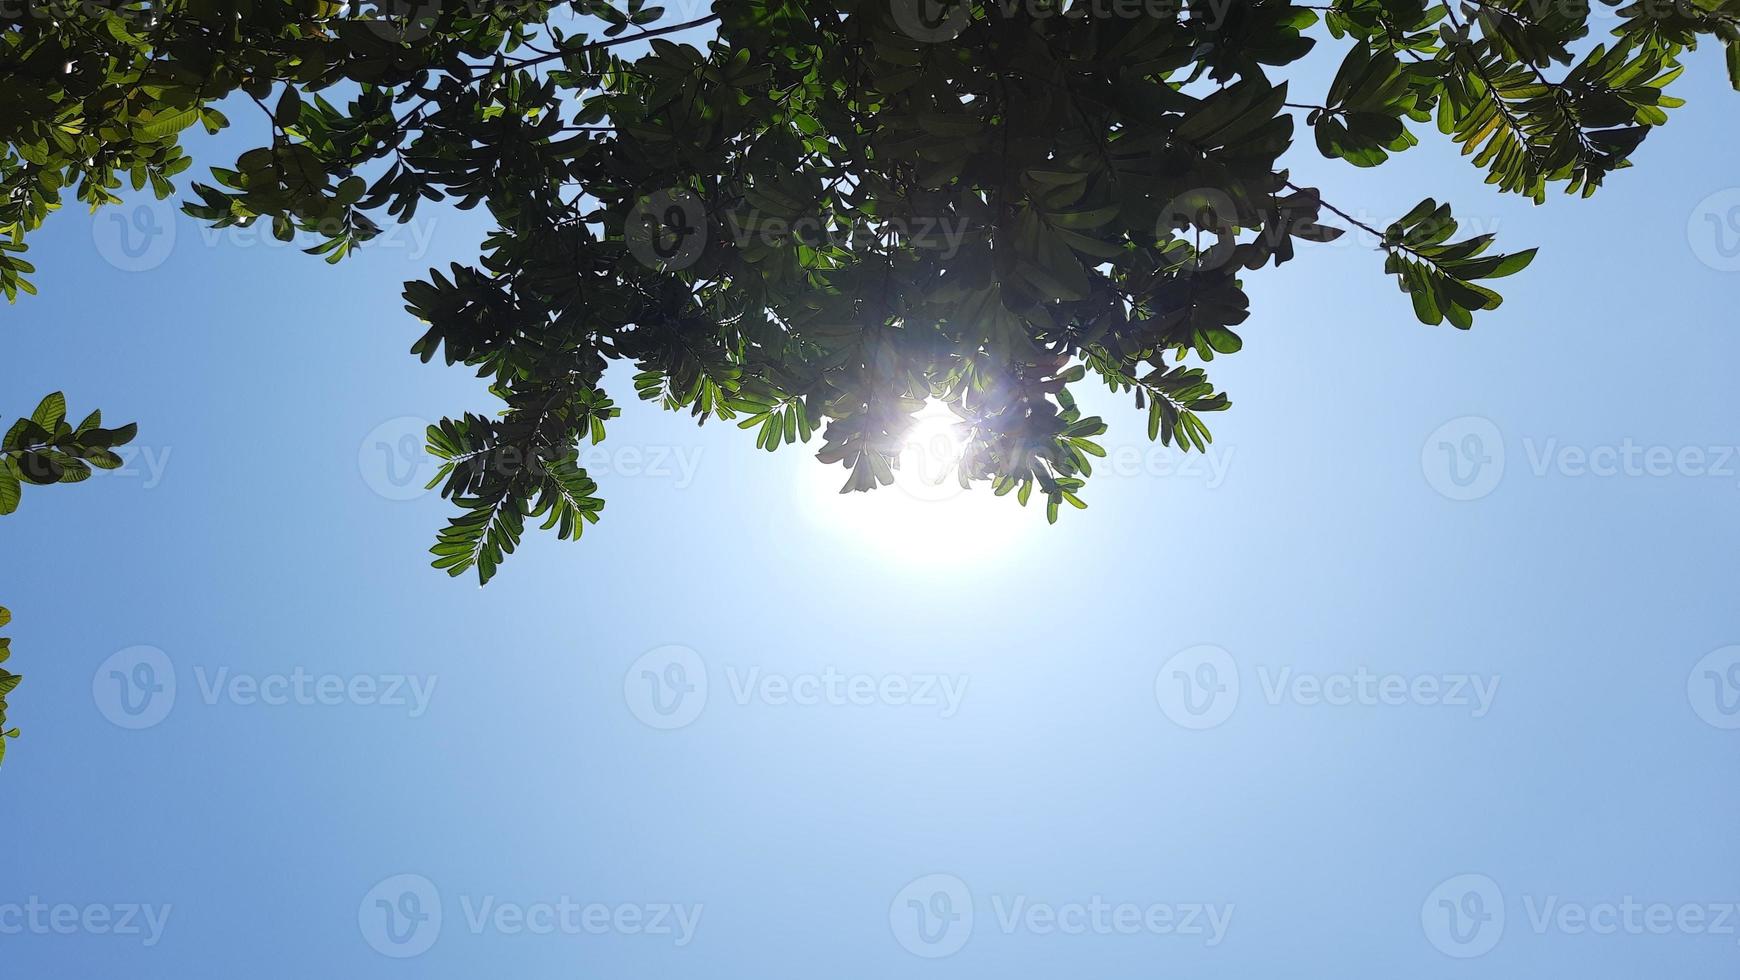 clear sky and no clouds during the day, photo from under a shady tree.